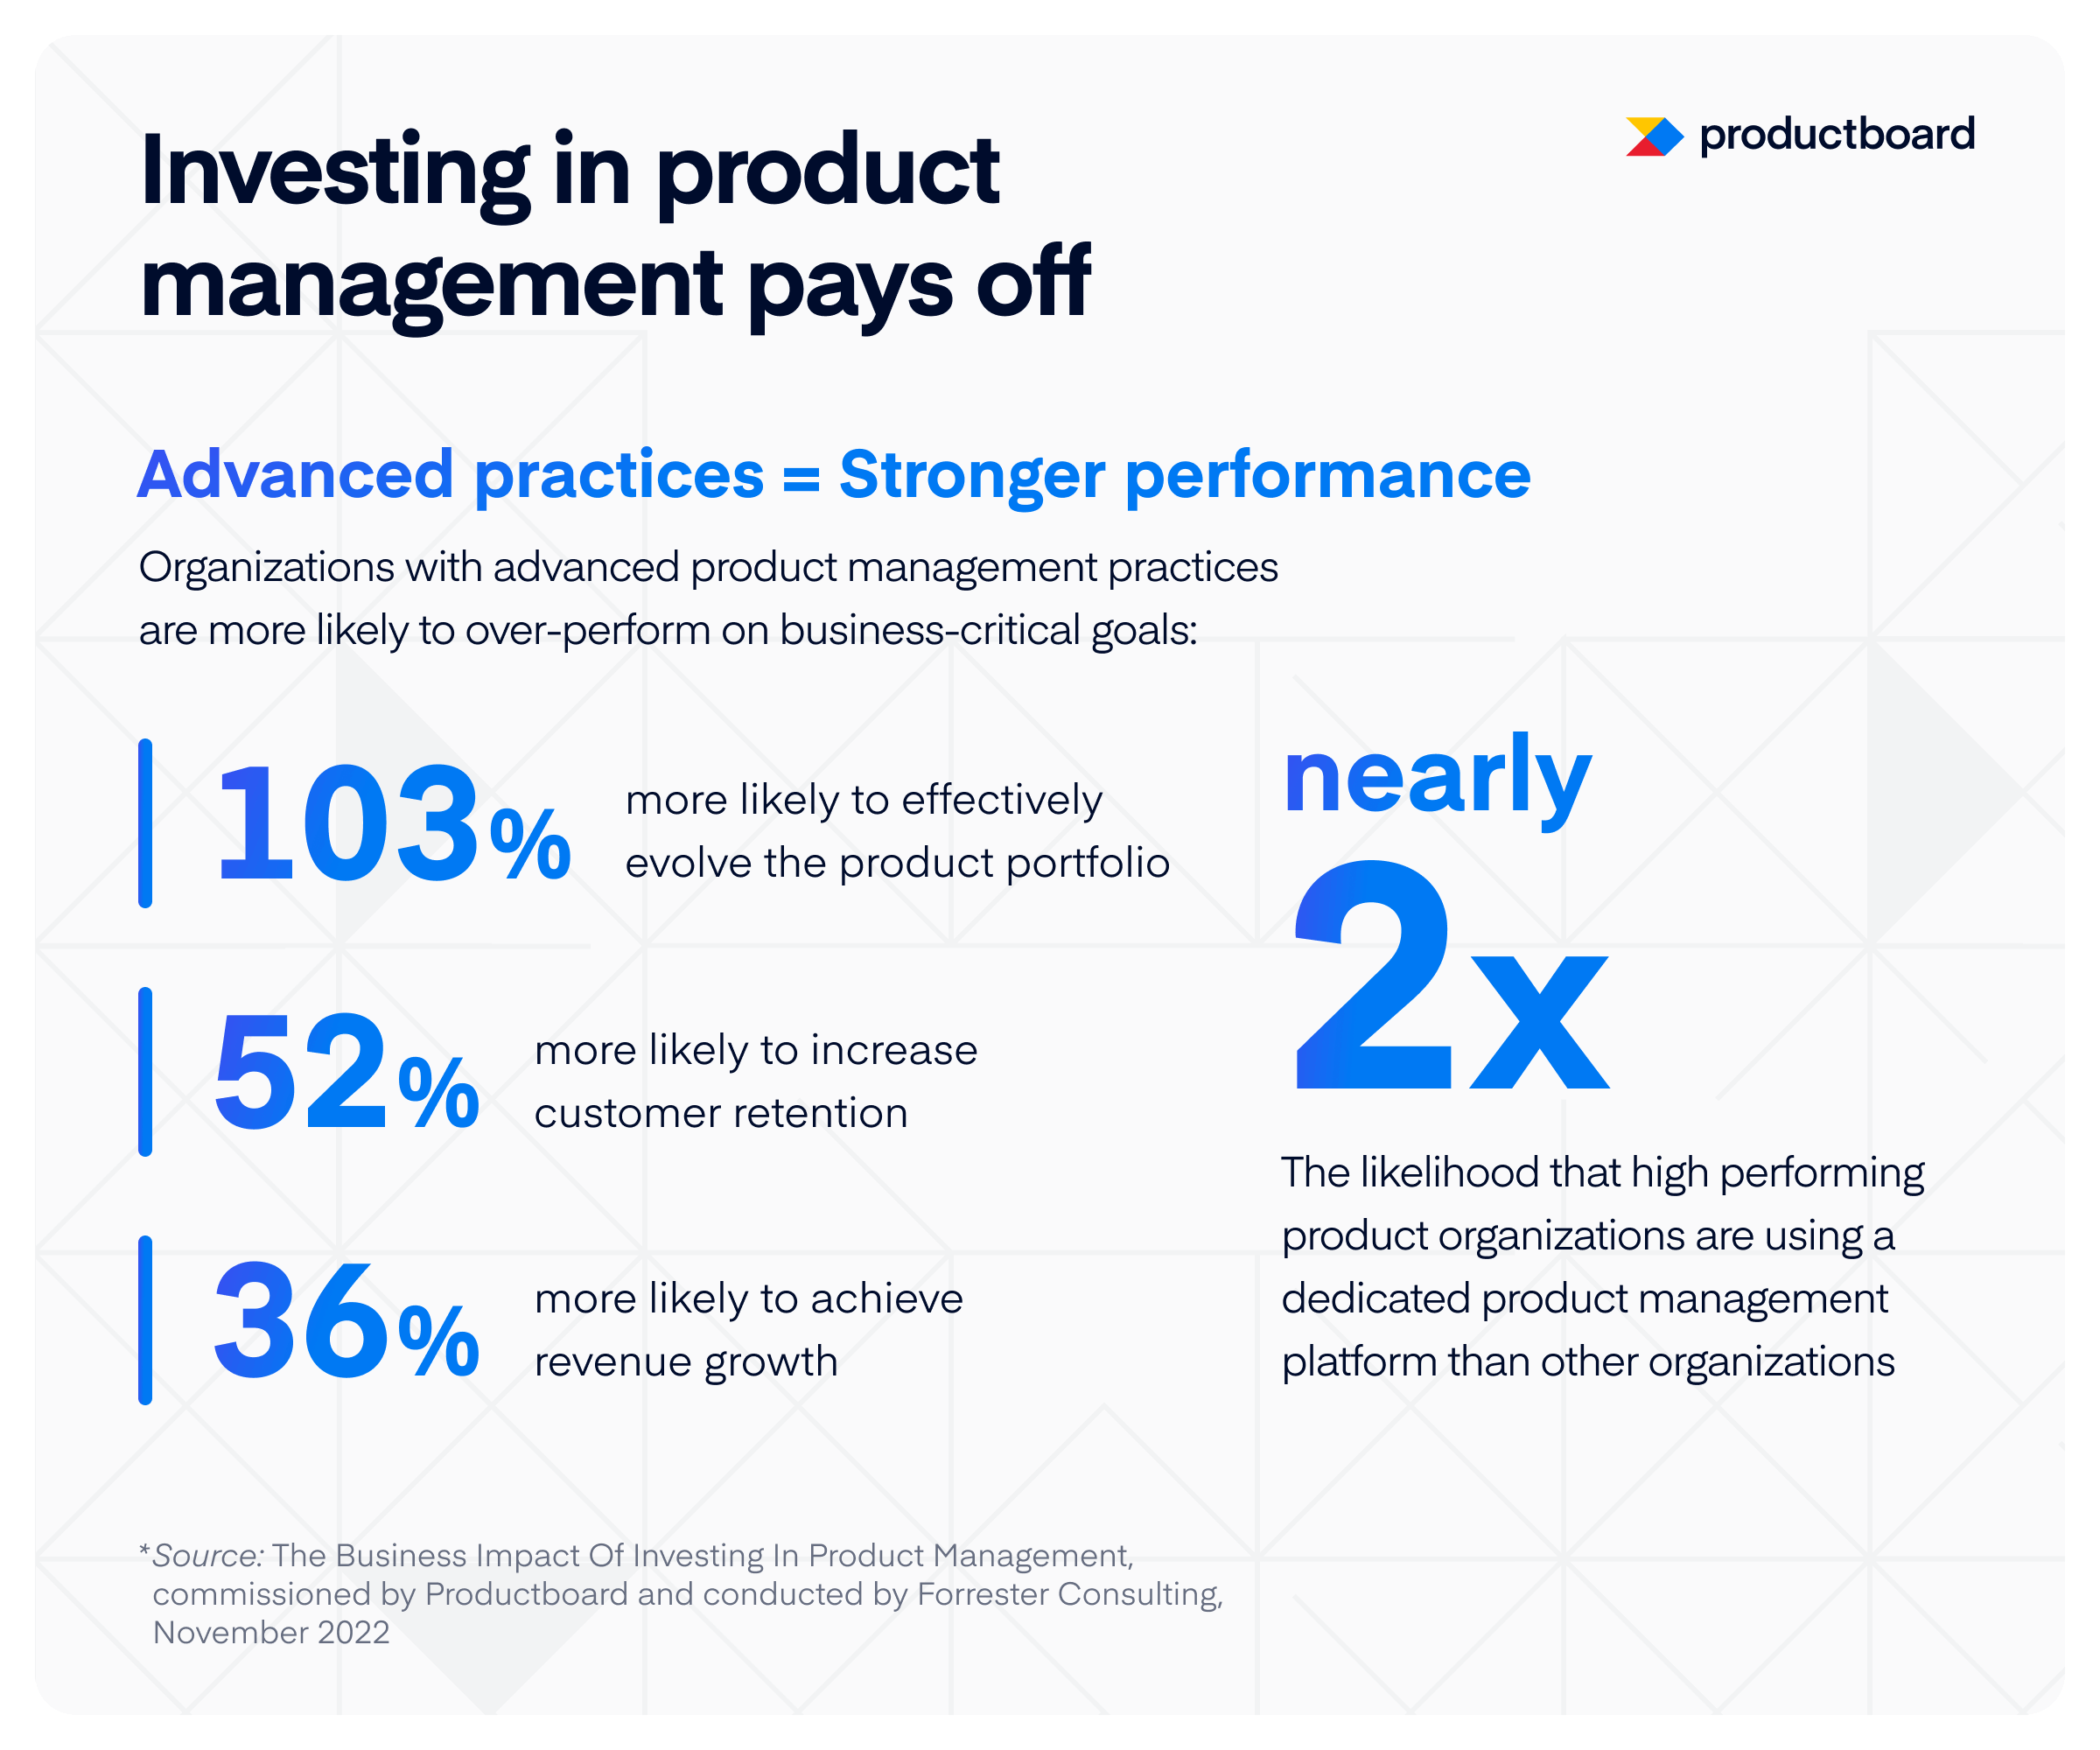 Productboard commissioned Forrester Consulting to conduct a new study, The Business Impact Of Investing In Product Management, in 2022. 